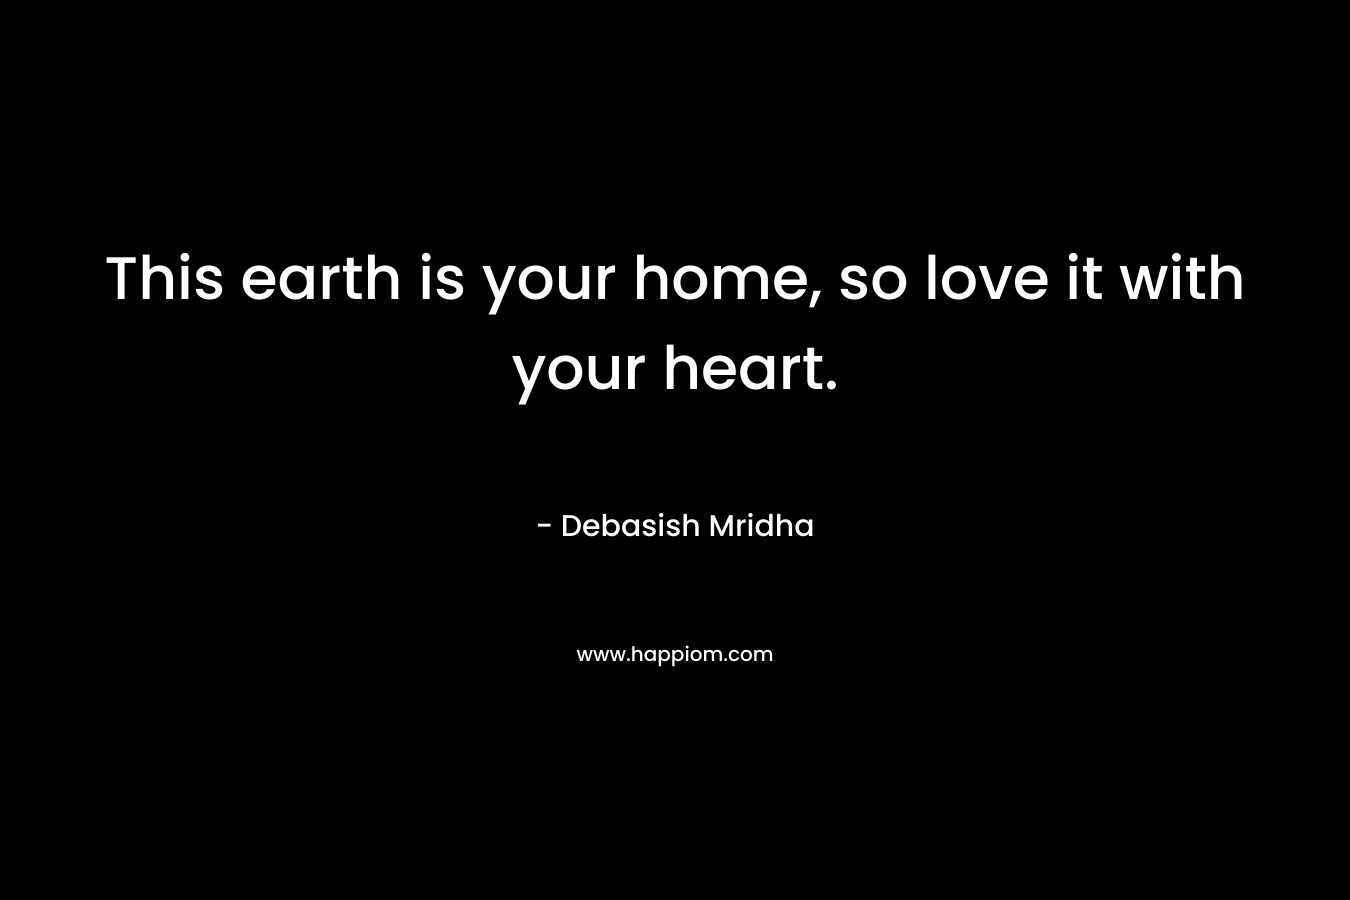 This earth is your home, so love it with your heart.